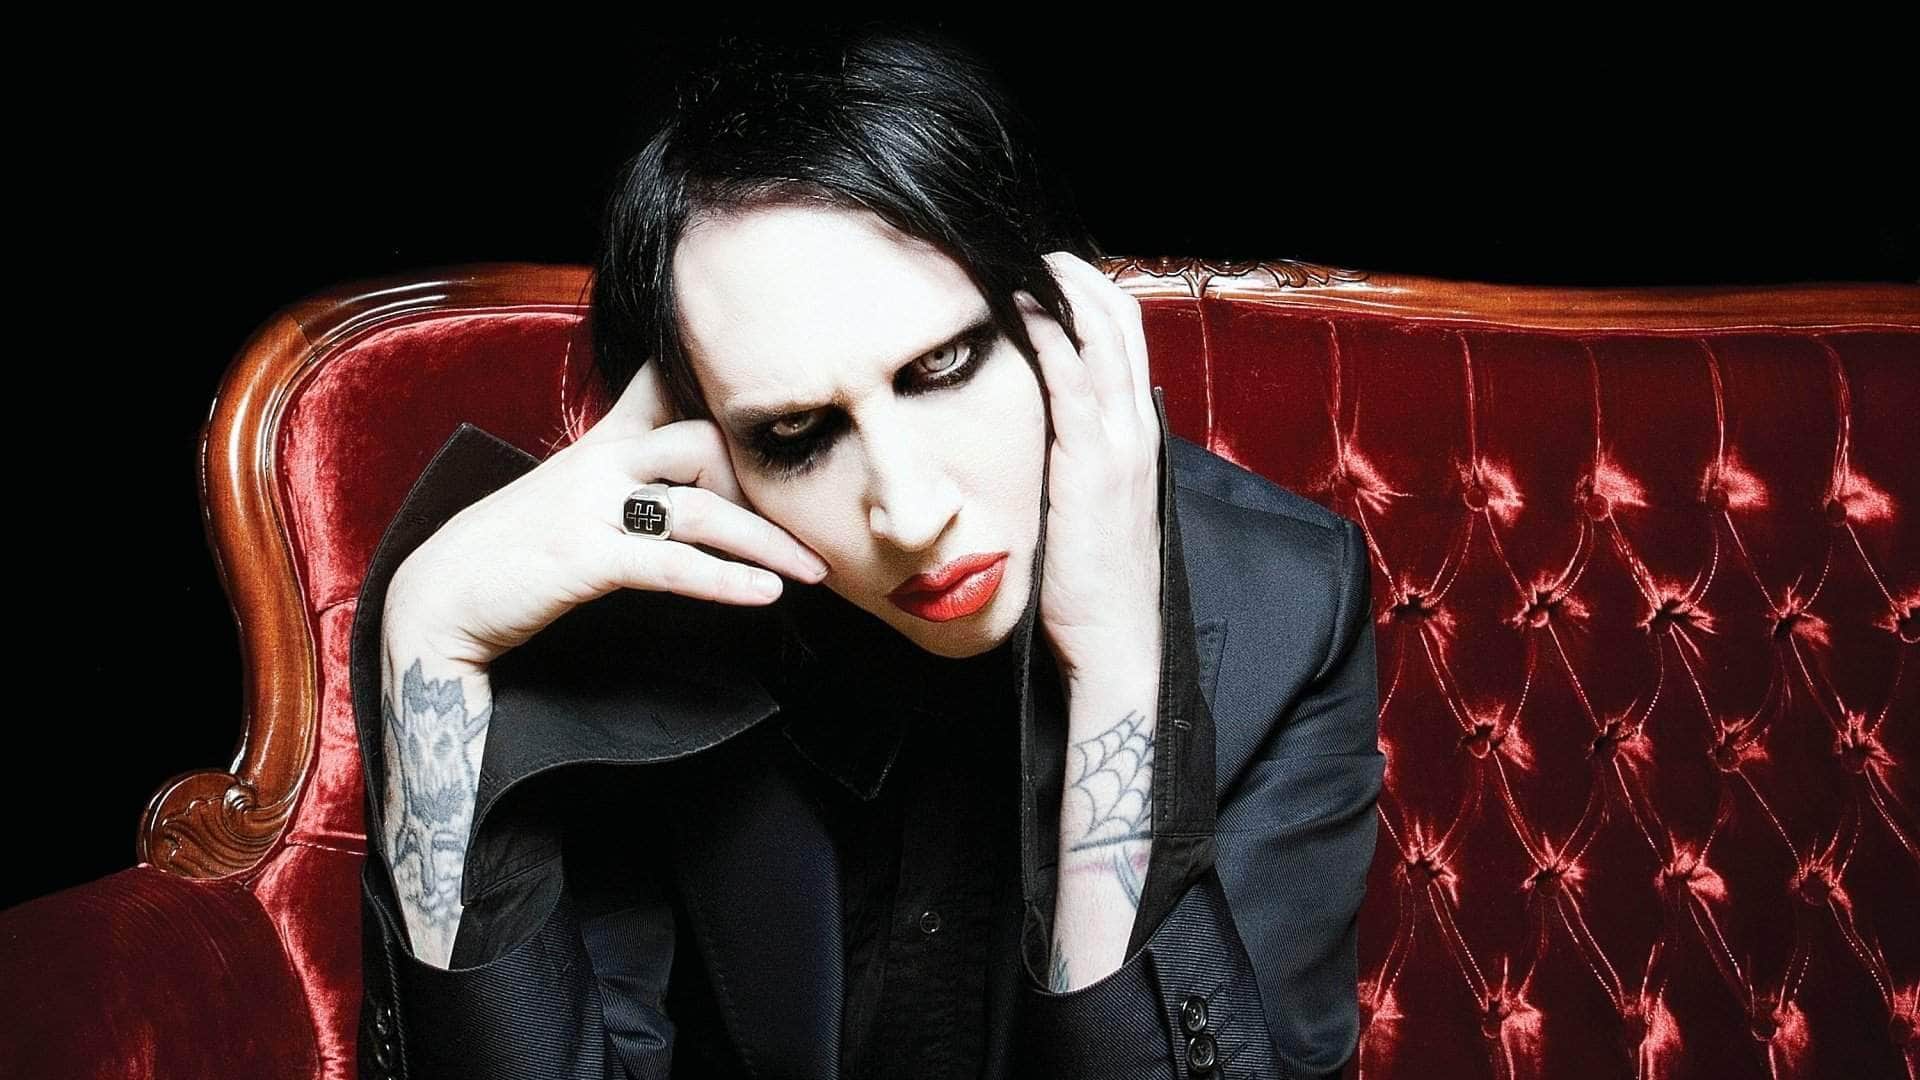 Male Goth Icons and the Influence They’ve Had on the World